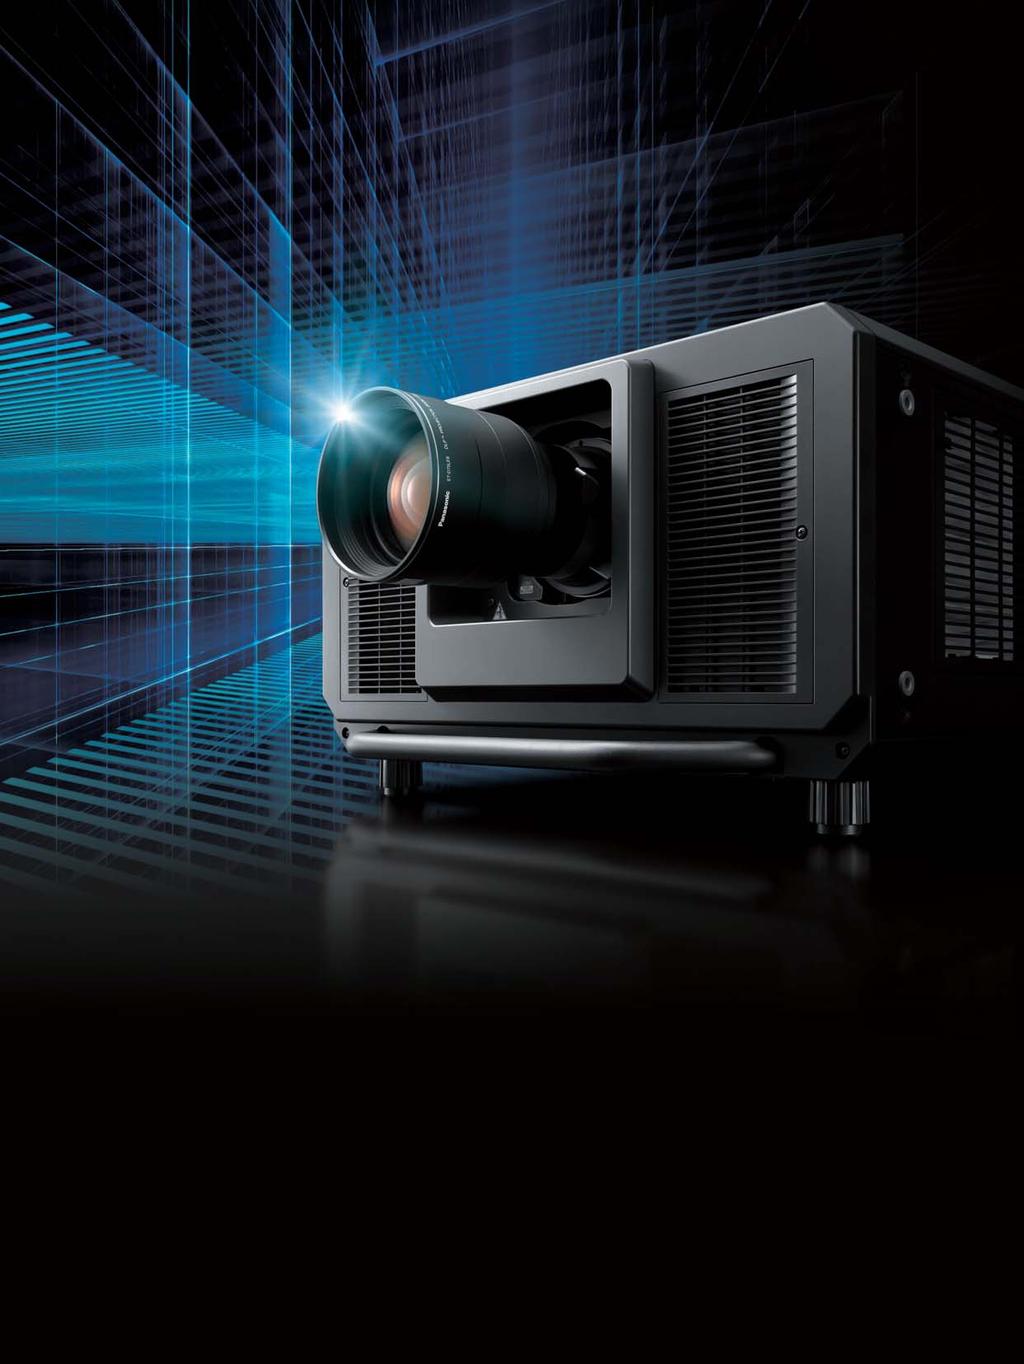 SOLID SHINE: Delivering Premier Image Quality and Ultimate Endurance Our DLP - and LED/Laser-based SOLID SHINE projectors offer superior performance in four key areas: image quality, reliability,